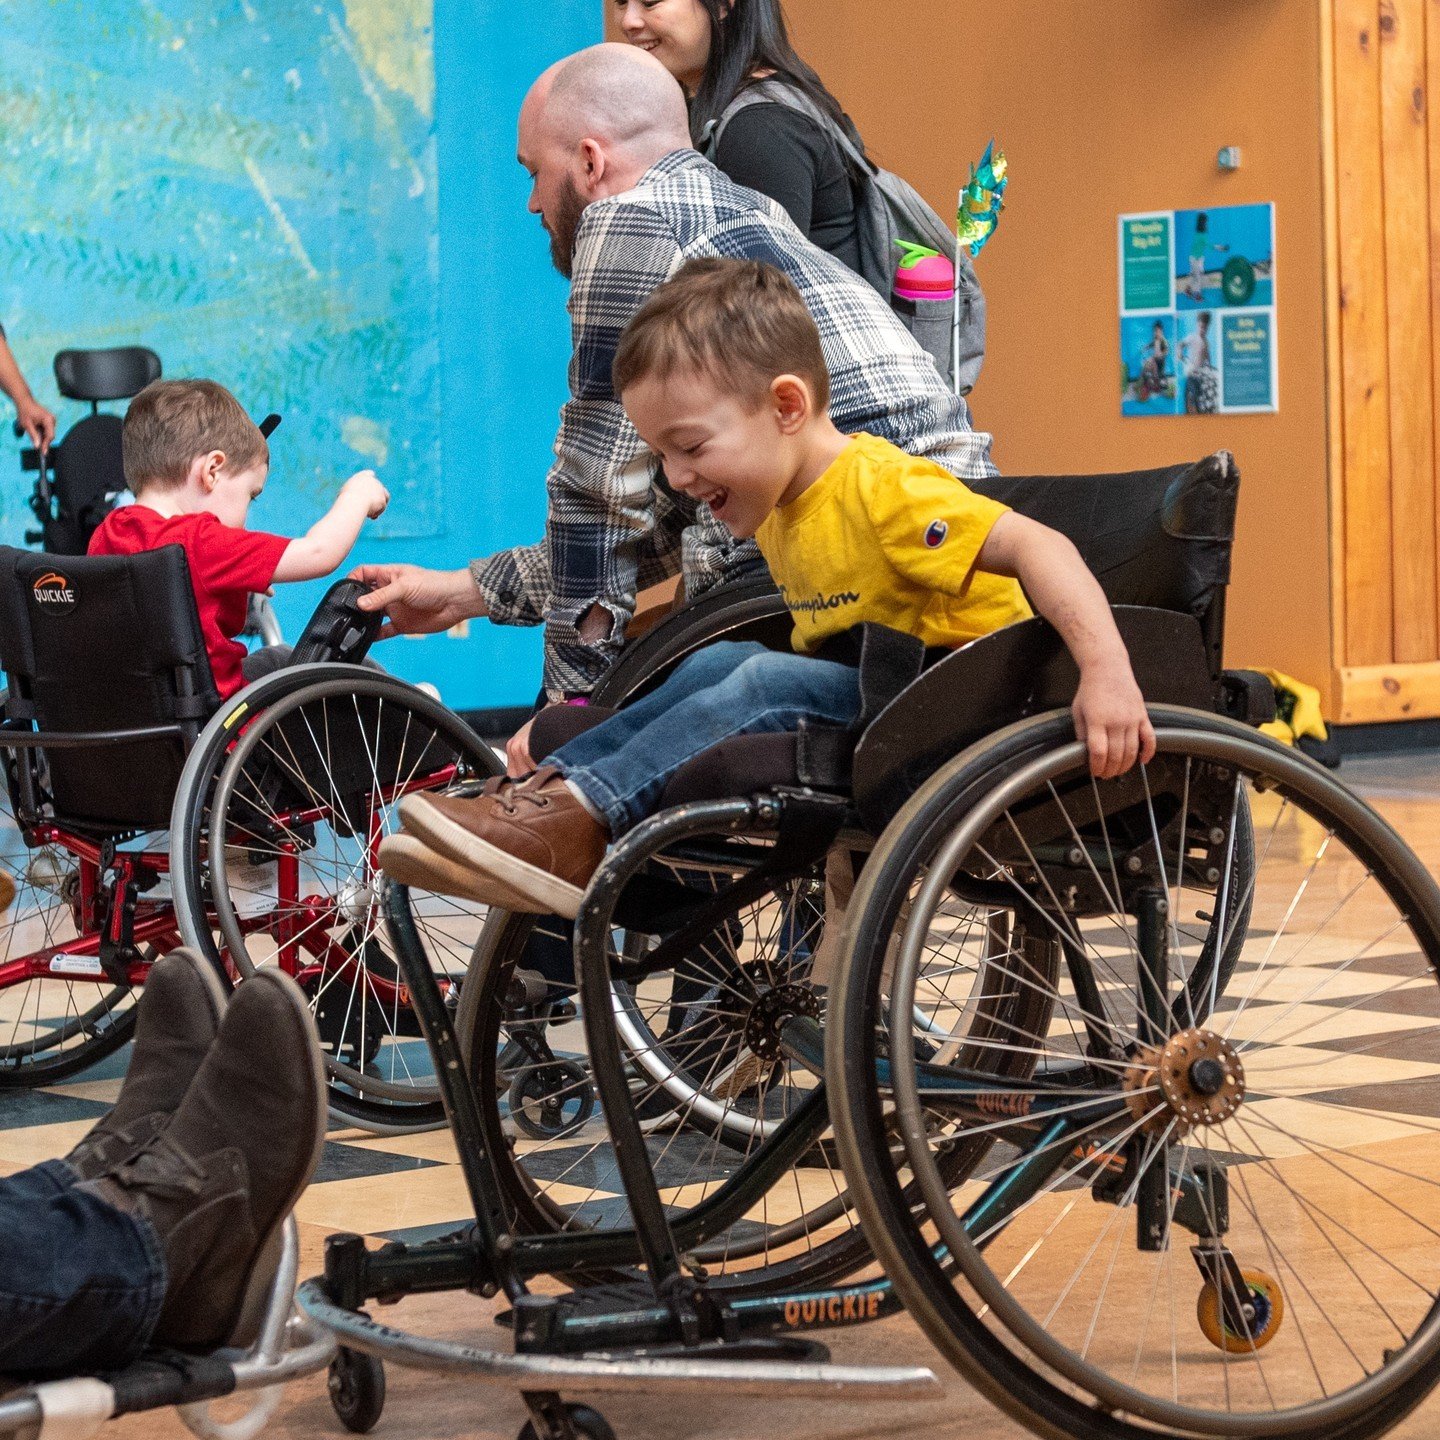 Registration for Play For All is NOW OPEN!

Play For All invites children and families with disabilities and Chicago Children&rsquo;s Museum members to come and experience the museum's inclusive, multisensory exhibits and programs. The museum opens a